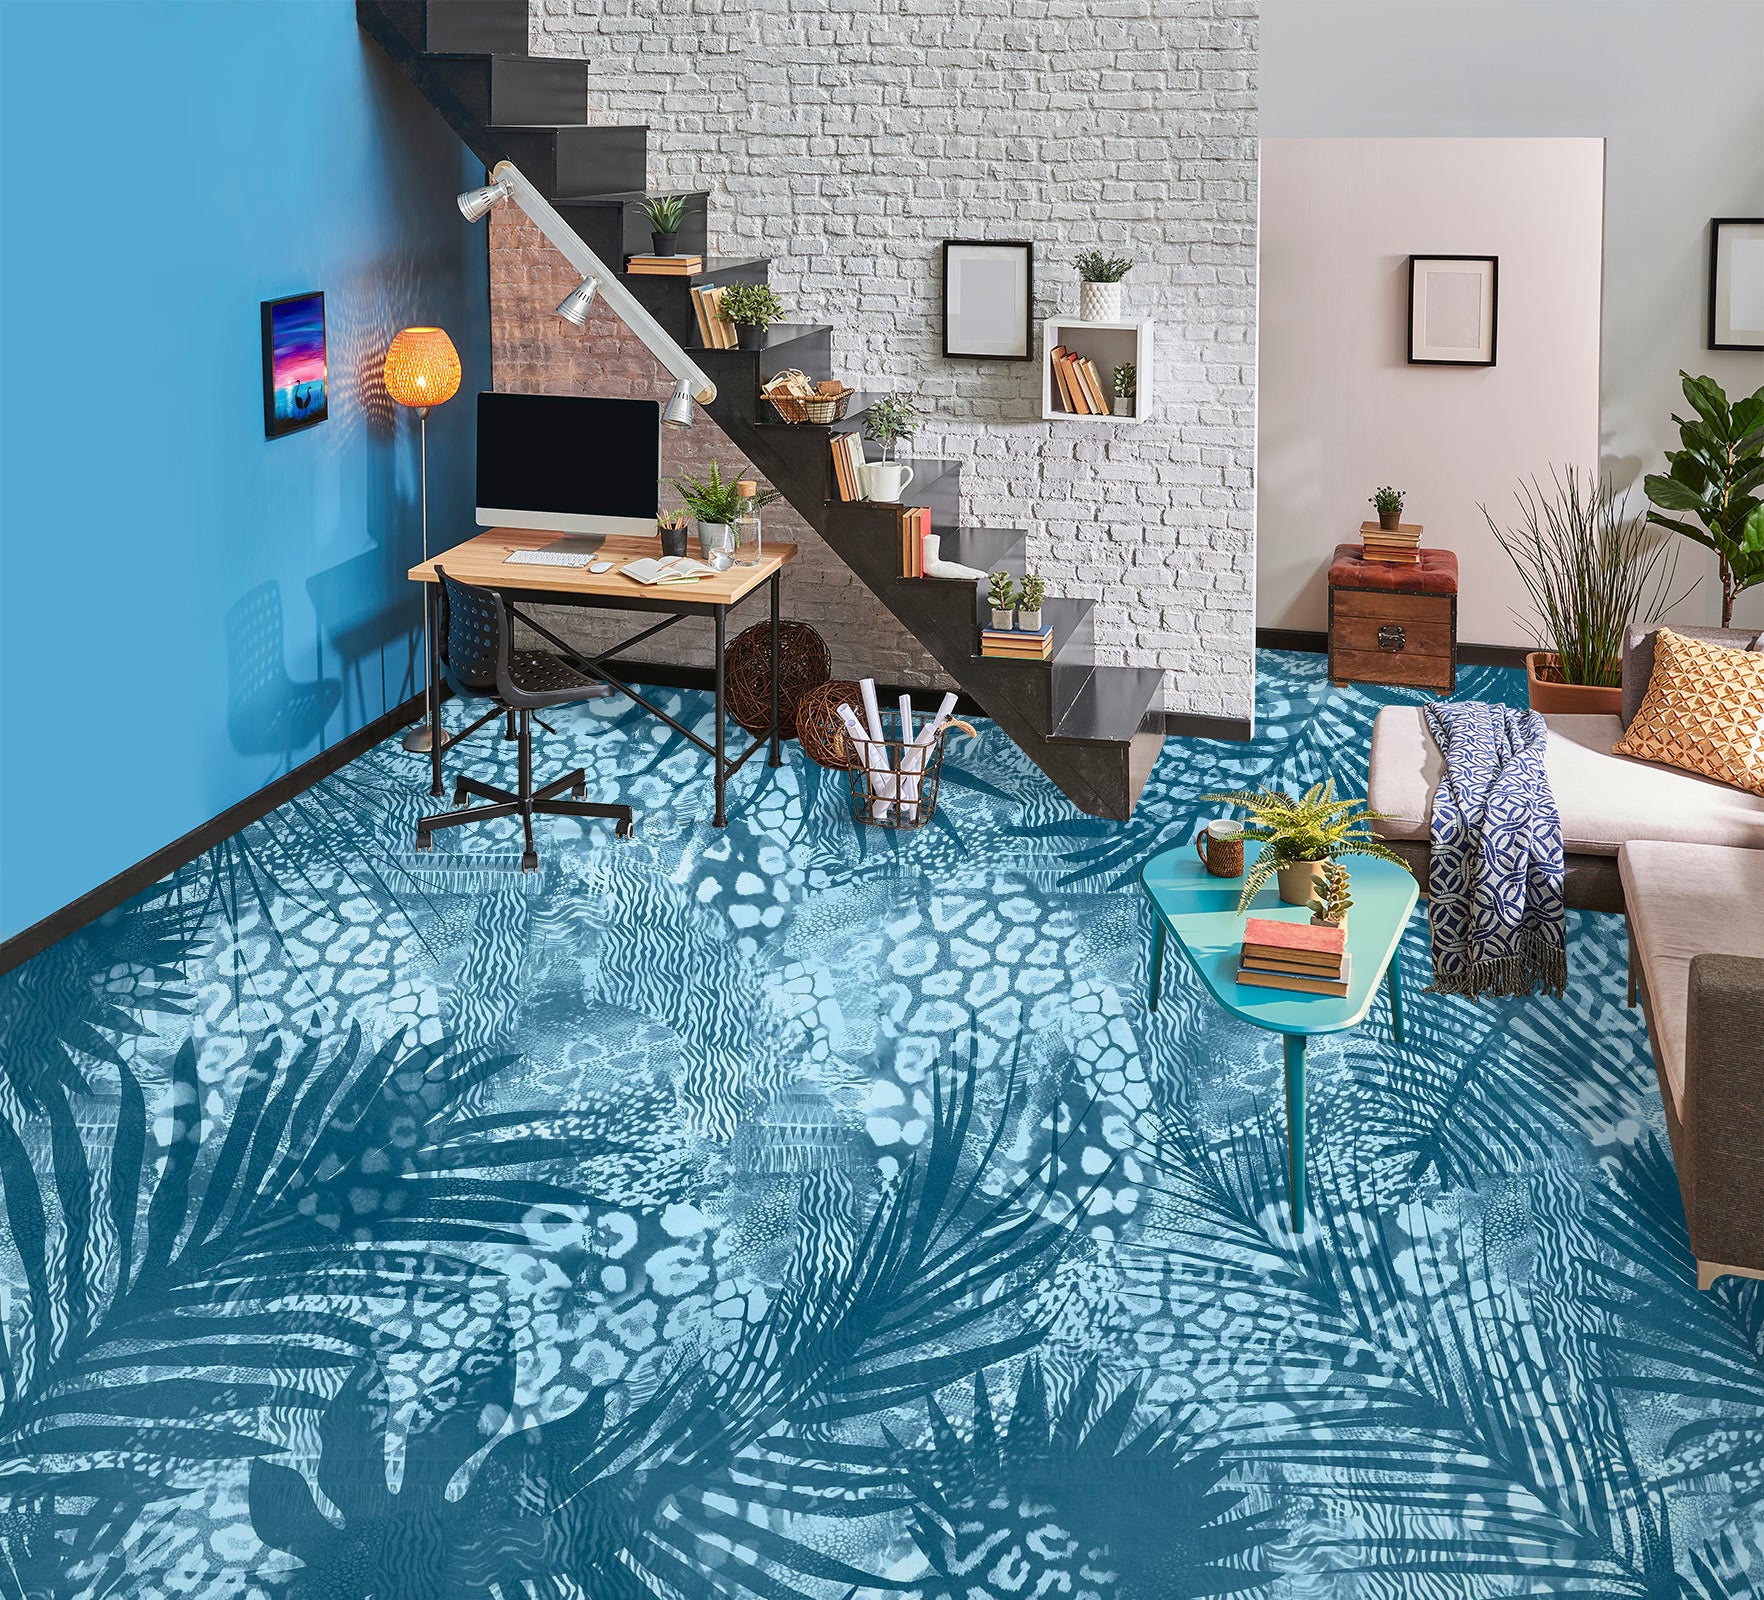 3D Blue Leaves Pattern 102118 Andrea Haase Floor Mural  Wallpaper Murals Self-Adhesive Removable Print Epoxy